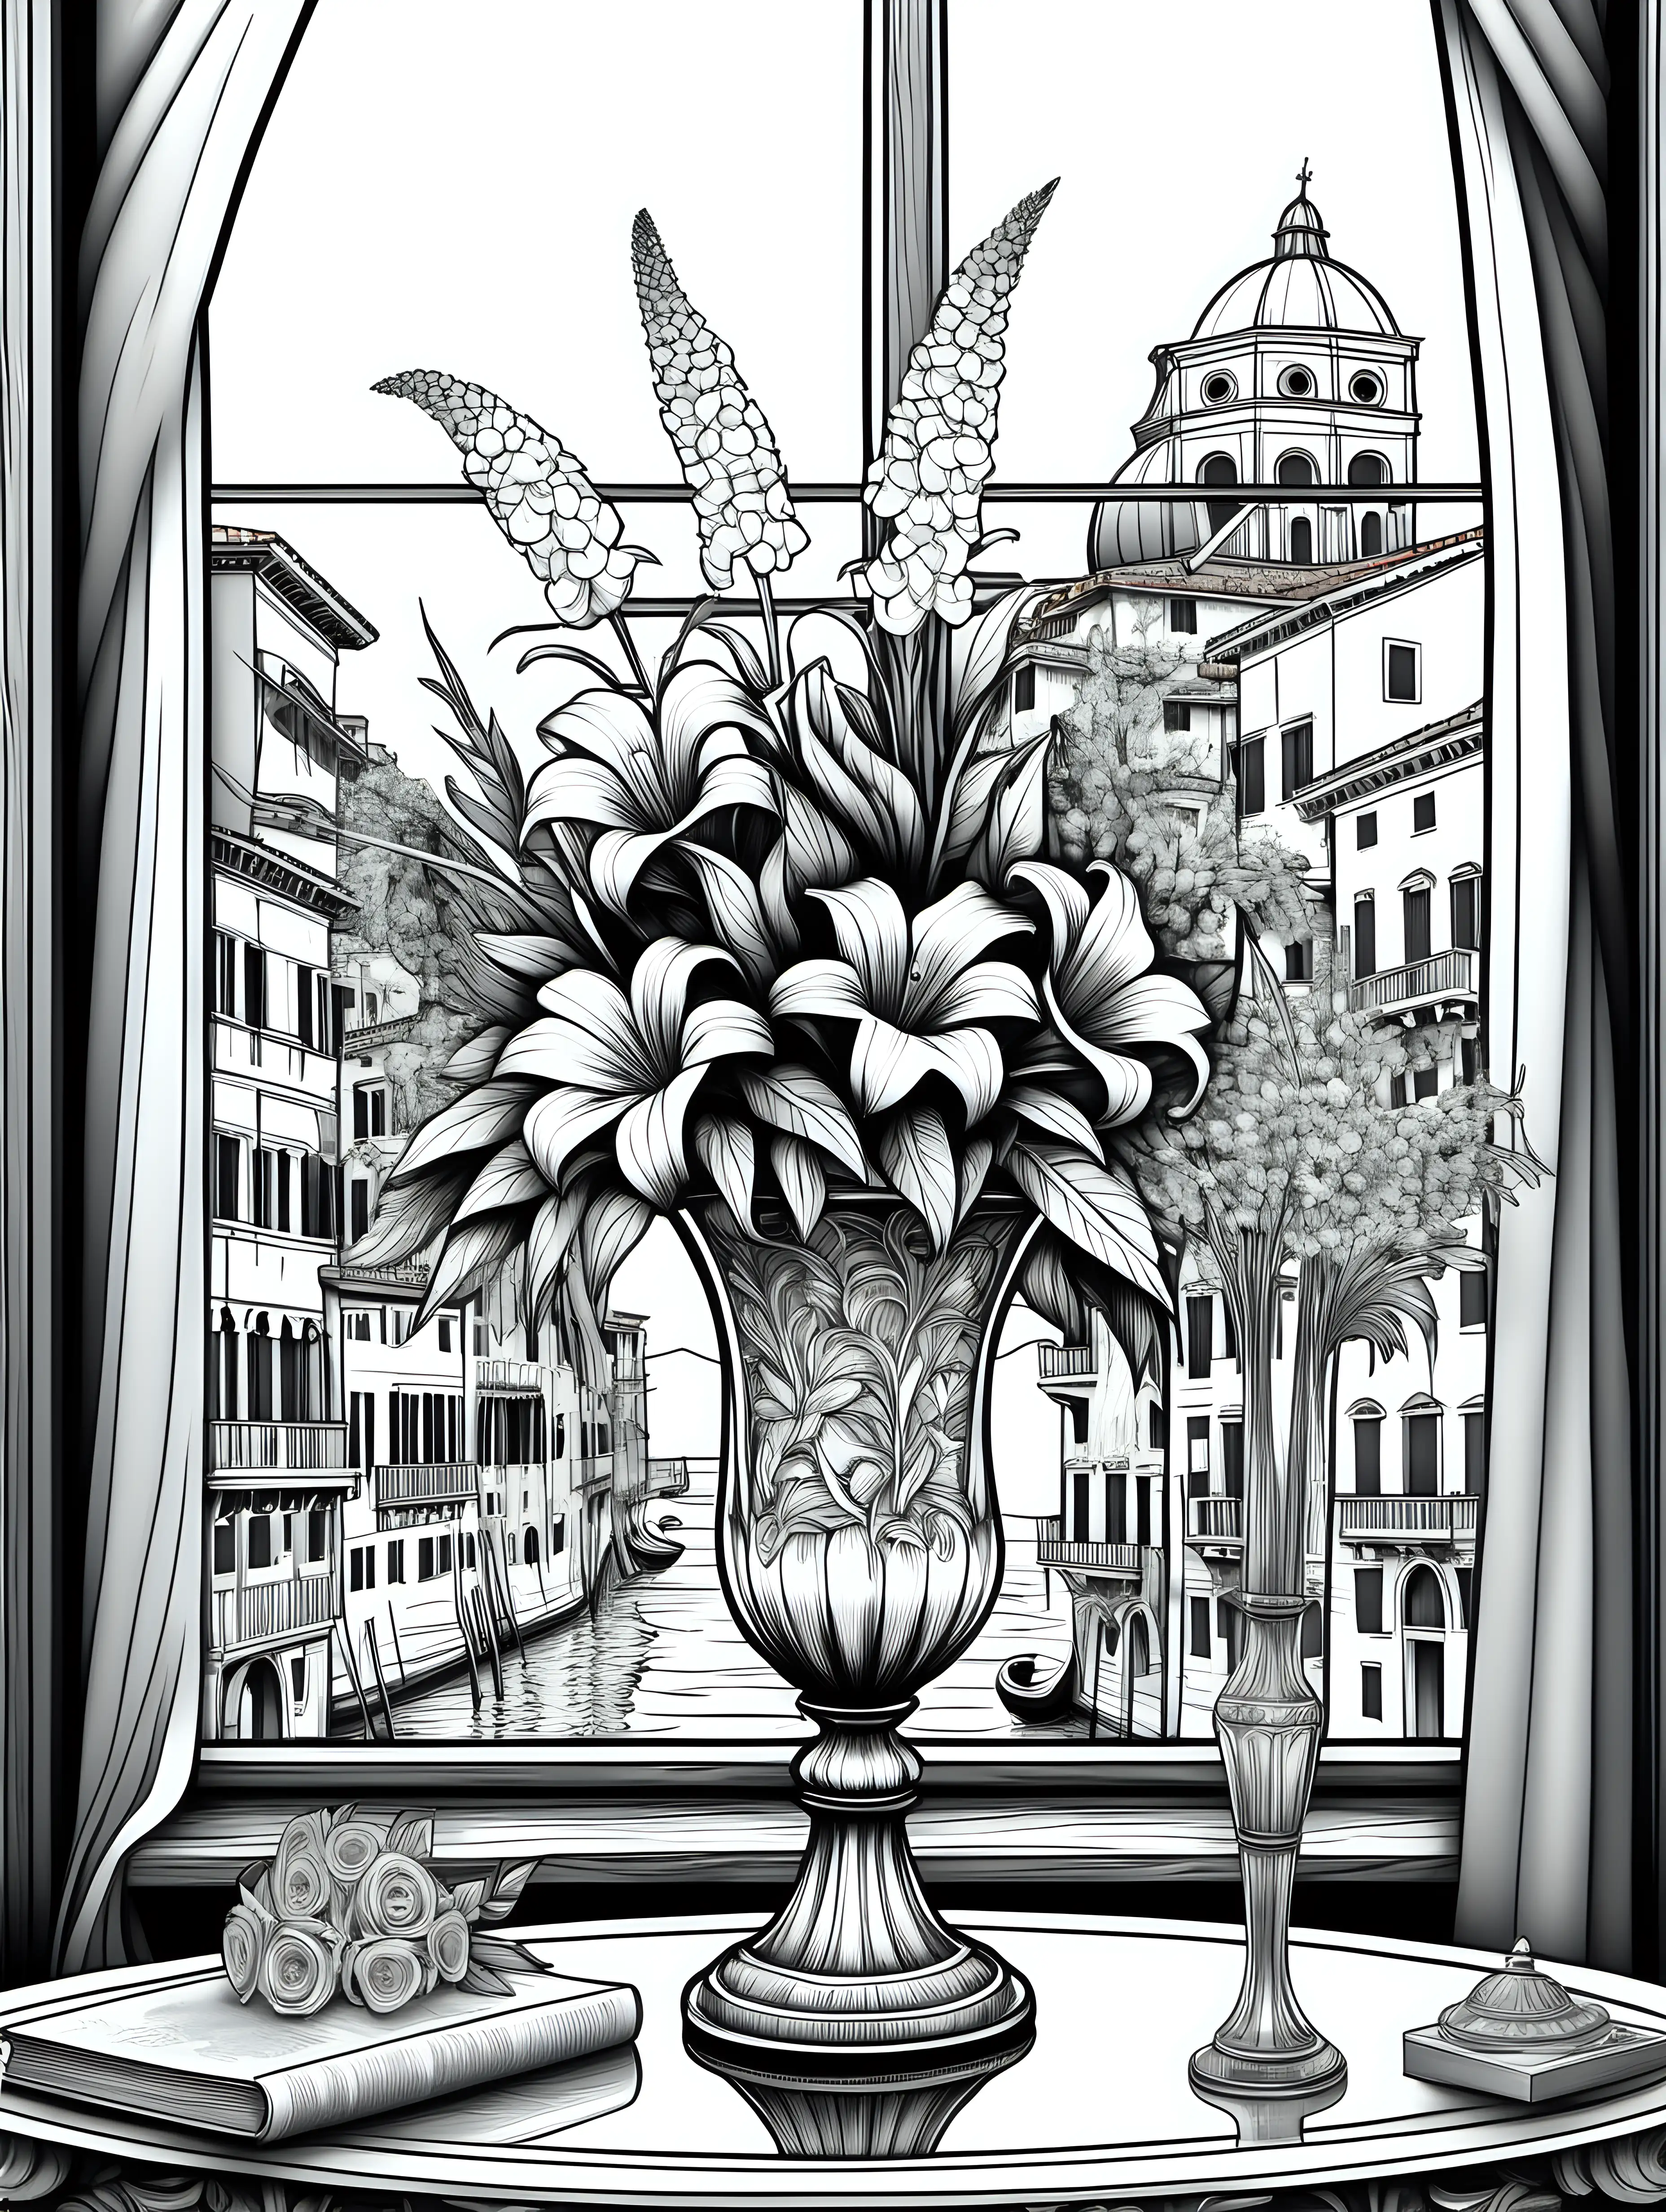 clean black and white, intricate, adult coloring page, white background, tall italian flower arrangement in a murano glass vase containing an assortment of flowers native to italy sitting next to a window on a table with a wood-paneled wall, statues, 2D, vector line drawing, venetian city scene with behind window, flowers are the focal point of the image